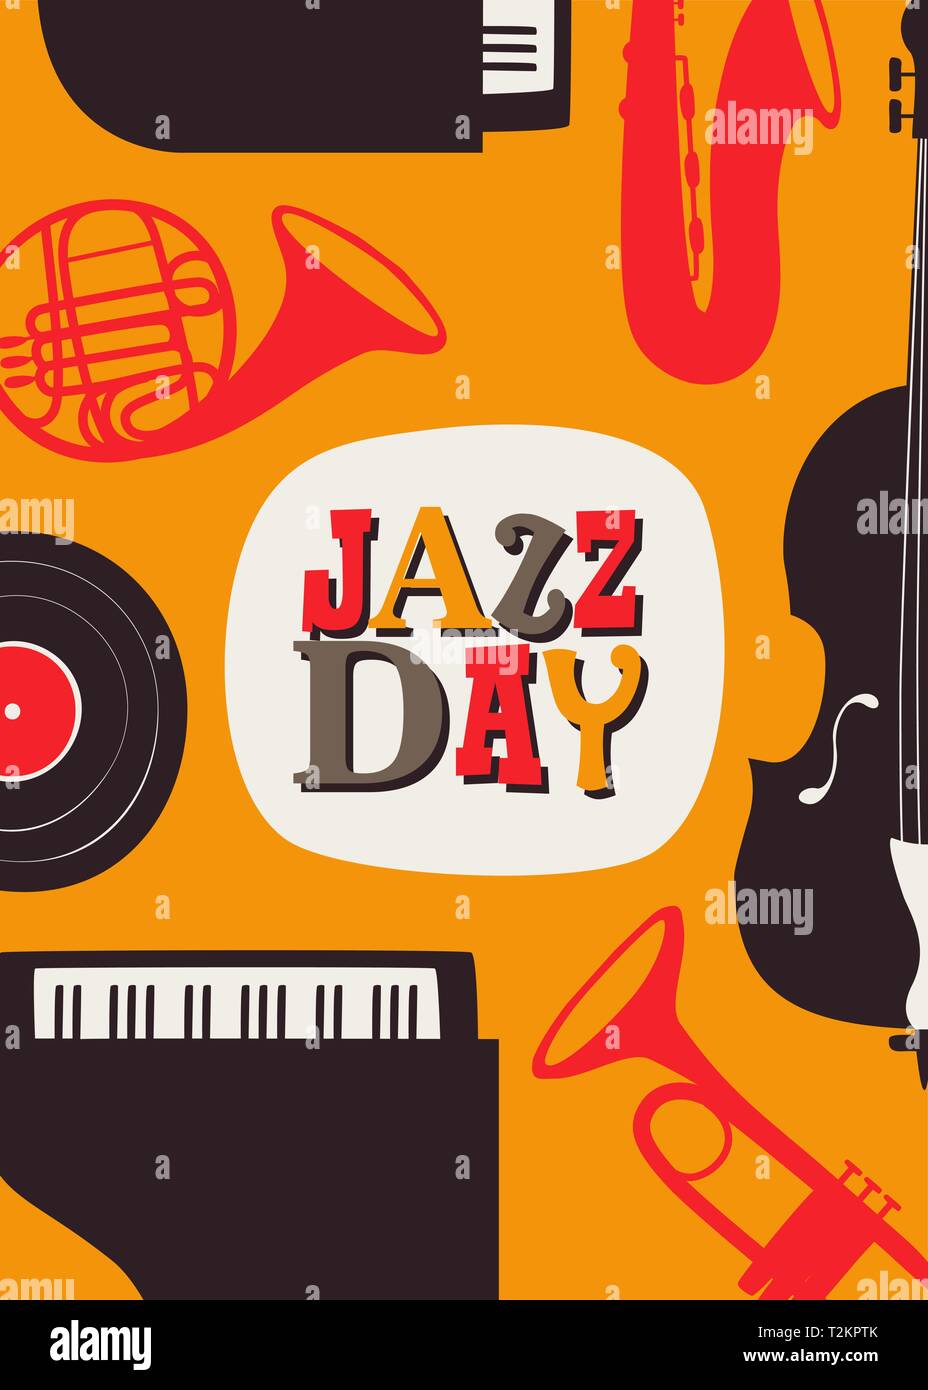 Jazz Day poster illustration for music festival event or concert. Retro background with vintage style band instruments. Stock Vector